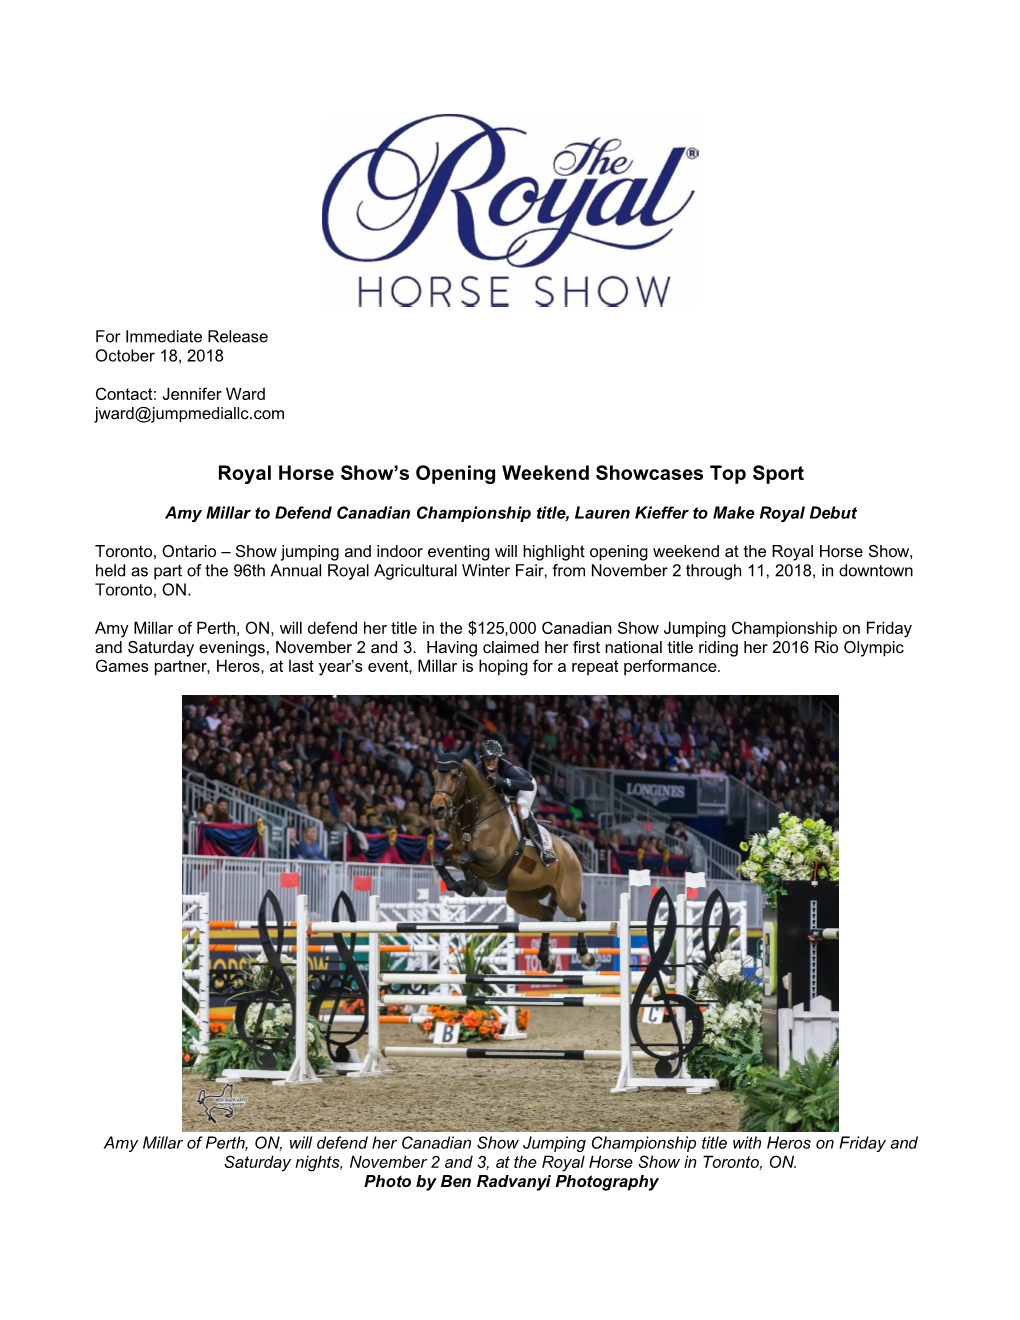 Royal Horse Show's Opening Weekend Showcases Top Sport